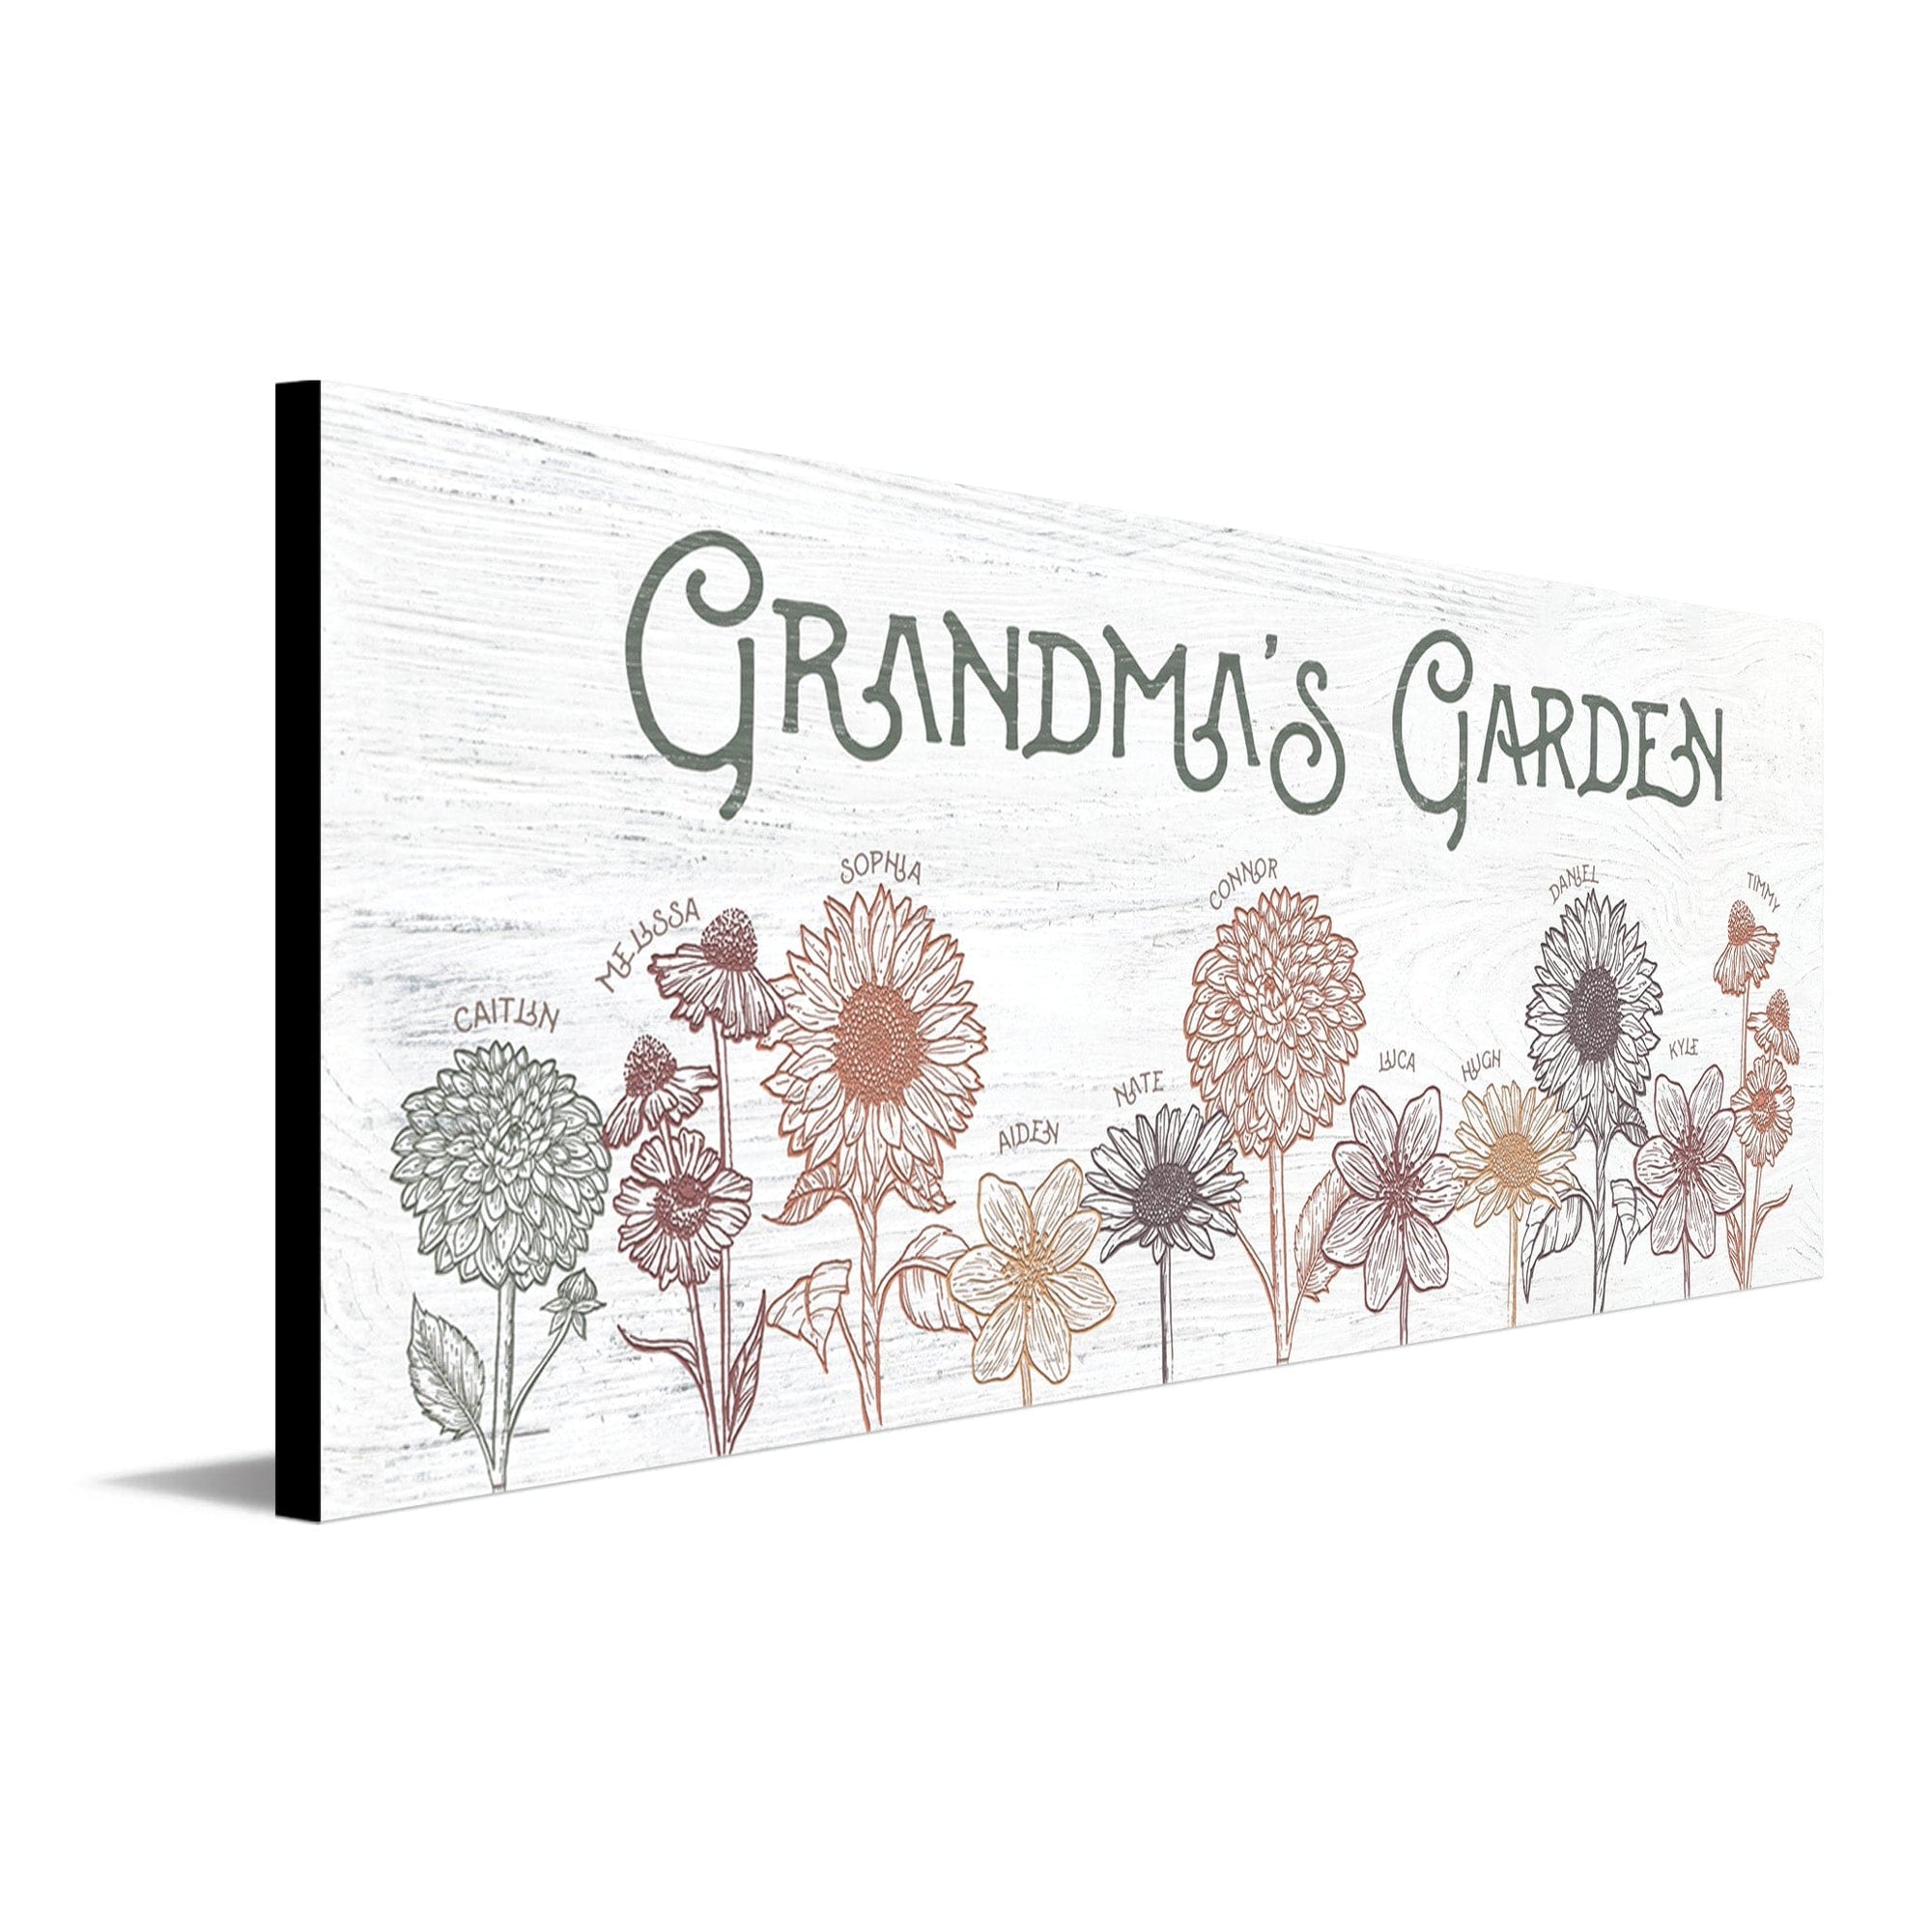 Grandma's Garden - Personalized gift for Grandparent from Personal Prints